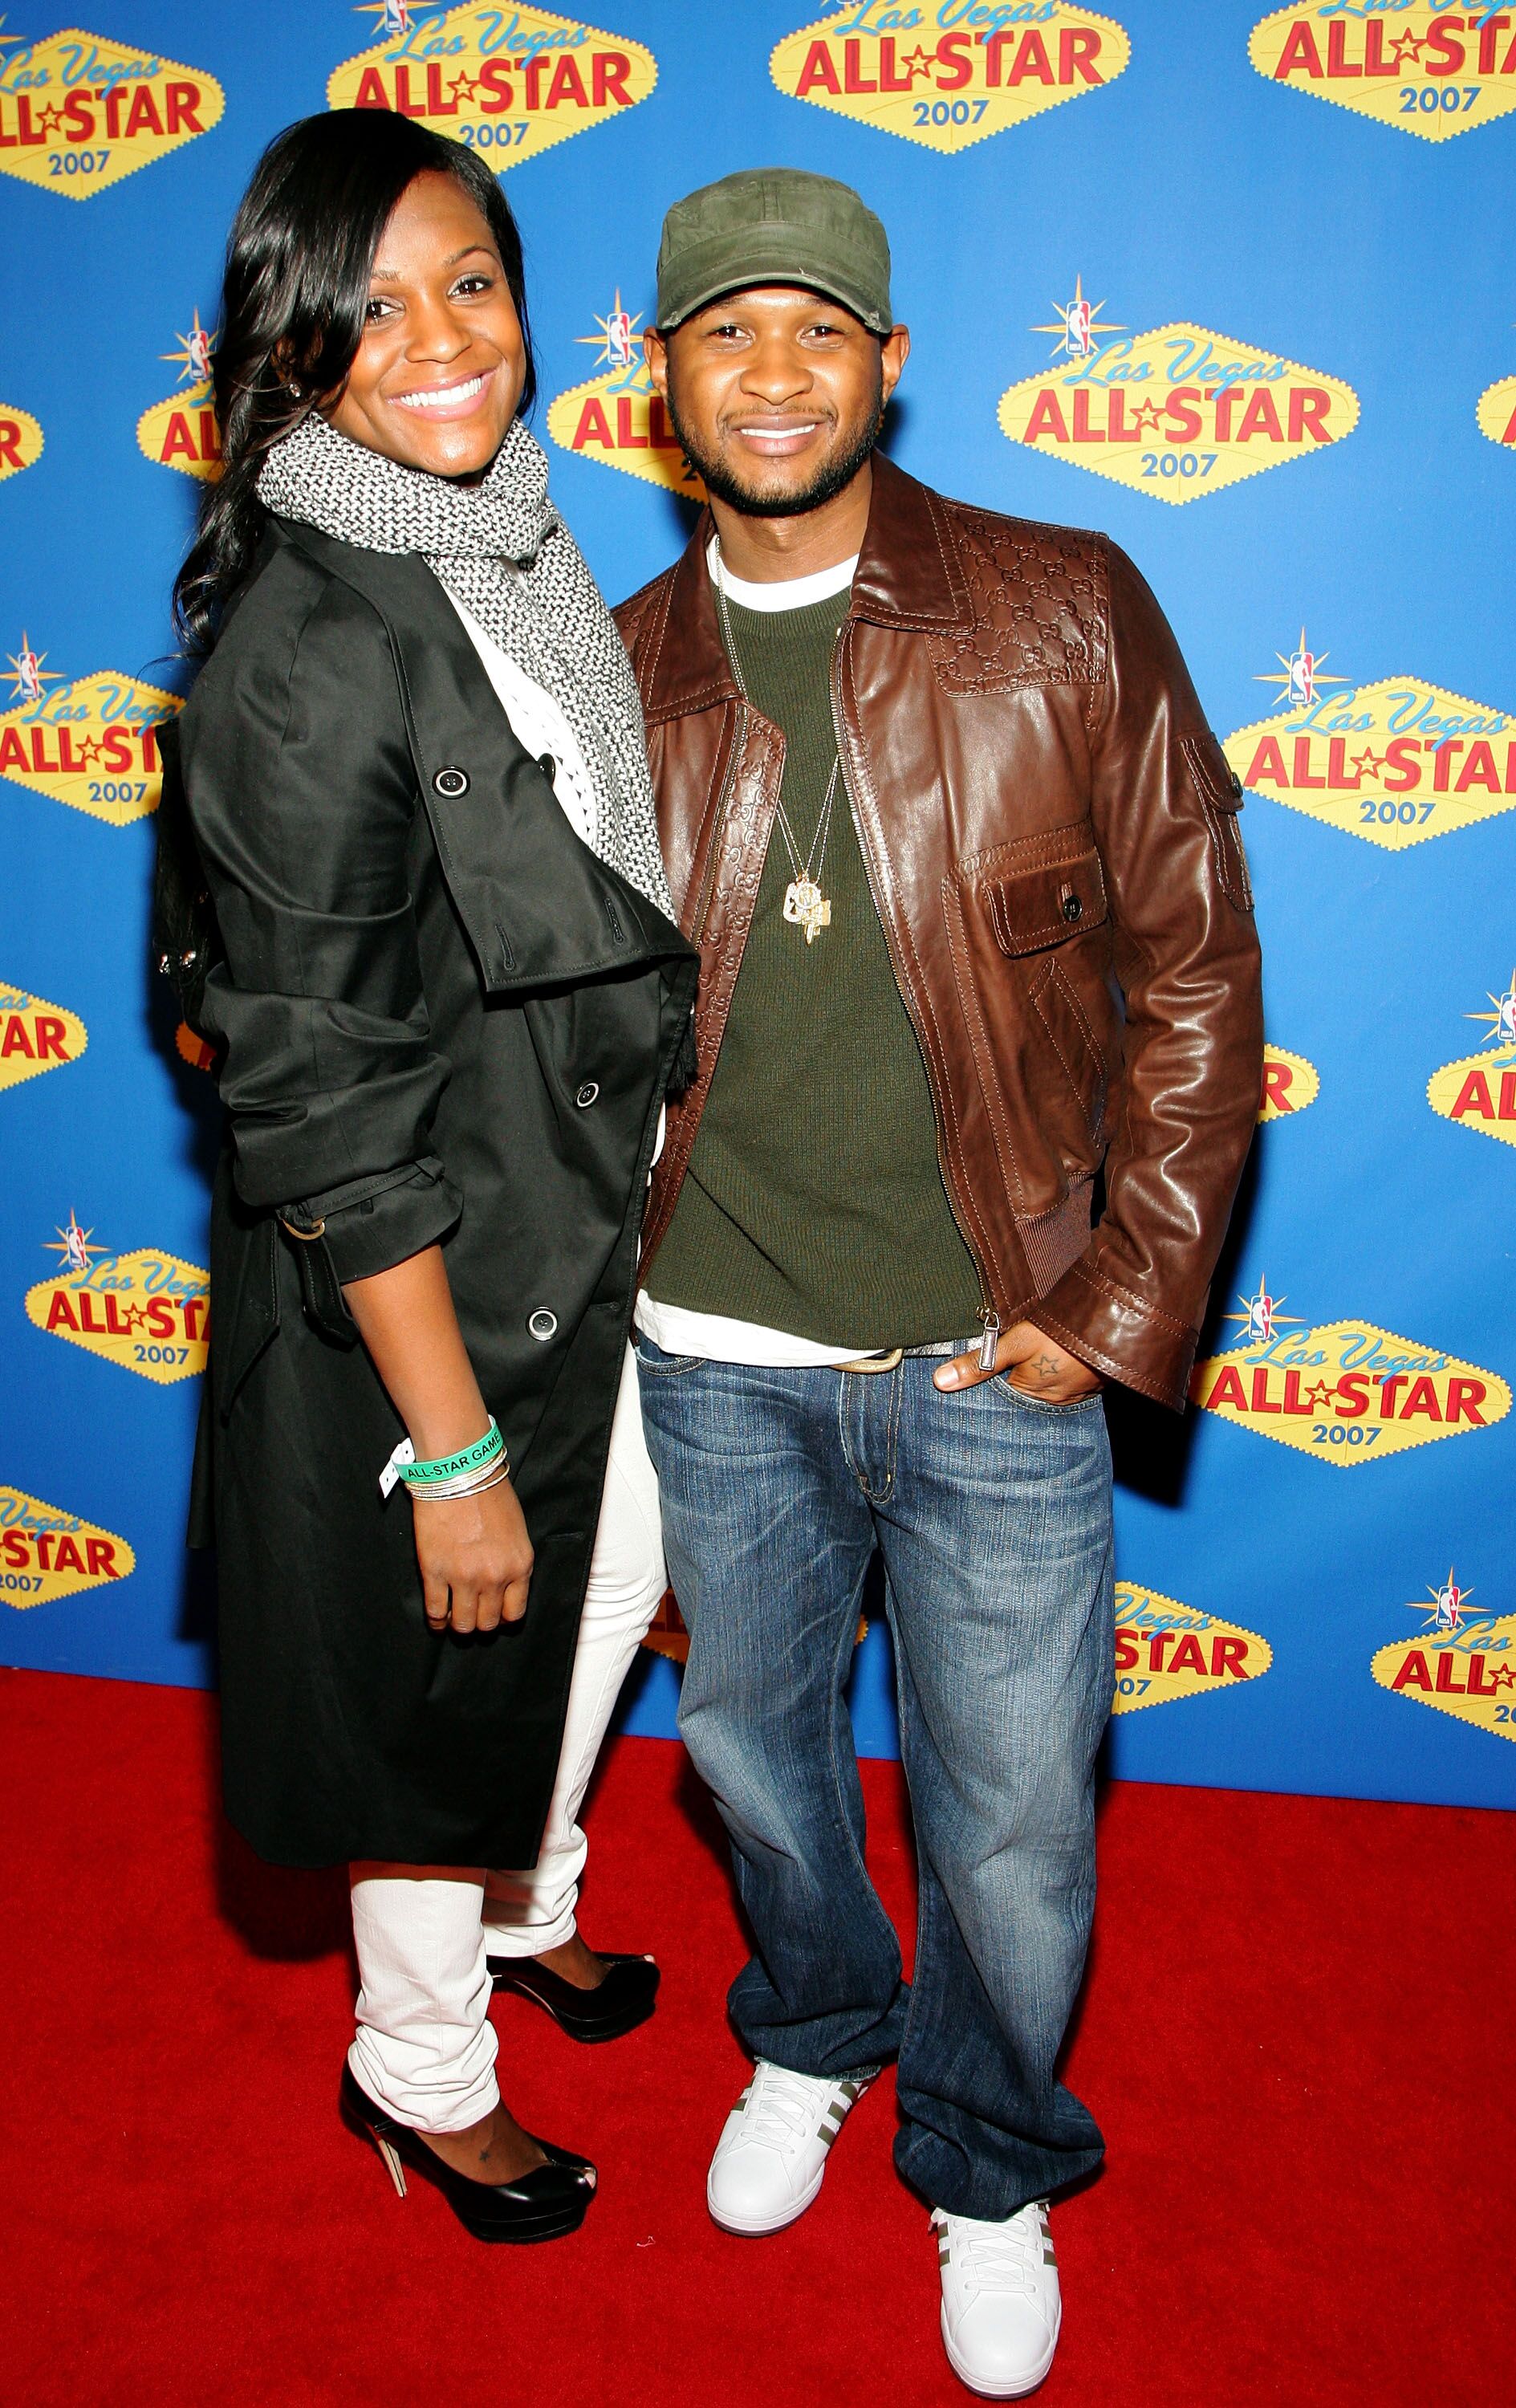 Usher and Tameka Foster at the 2007 NBA All-Star Game in Las Vegas in 2007 | Source: Getty Images